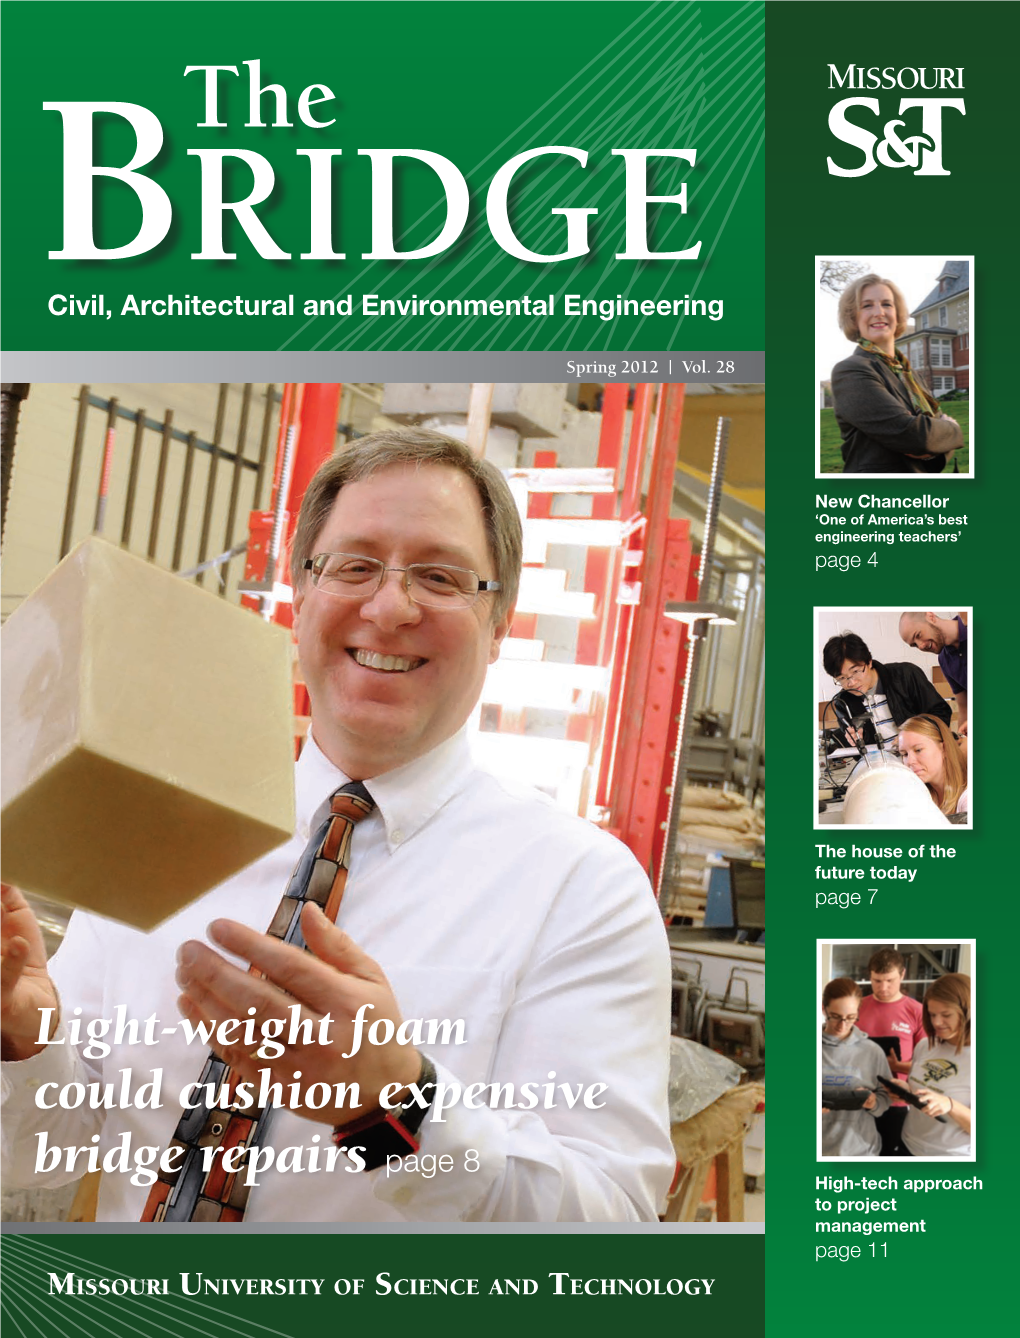 Light-Weight Foam Could Cushion Expensive Bridge Repairs Page 8